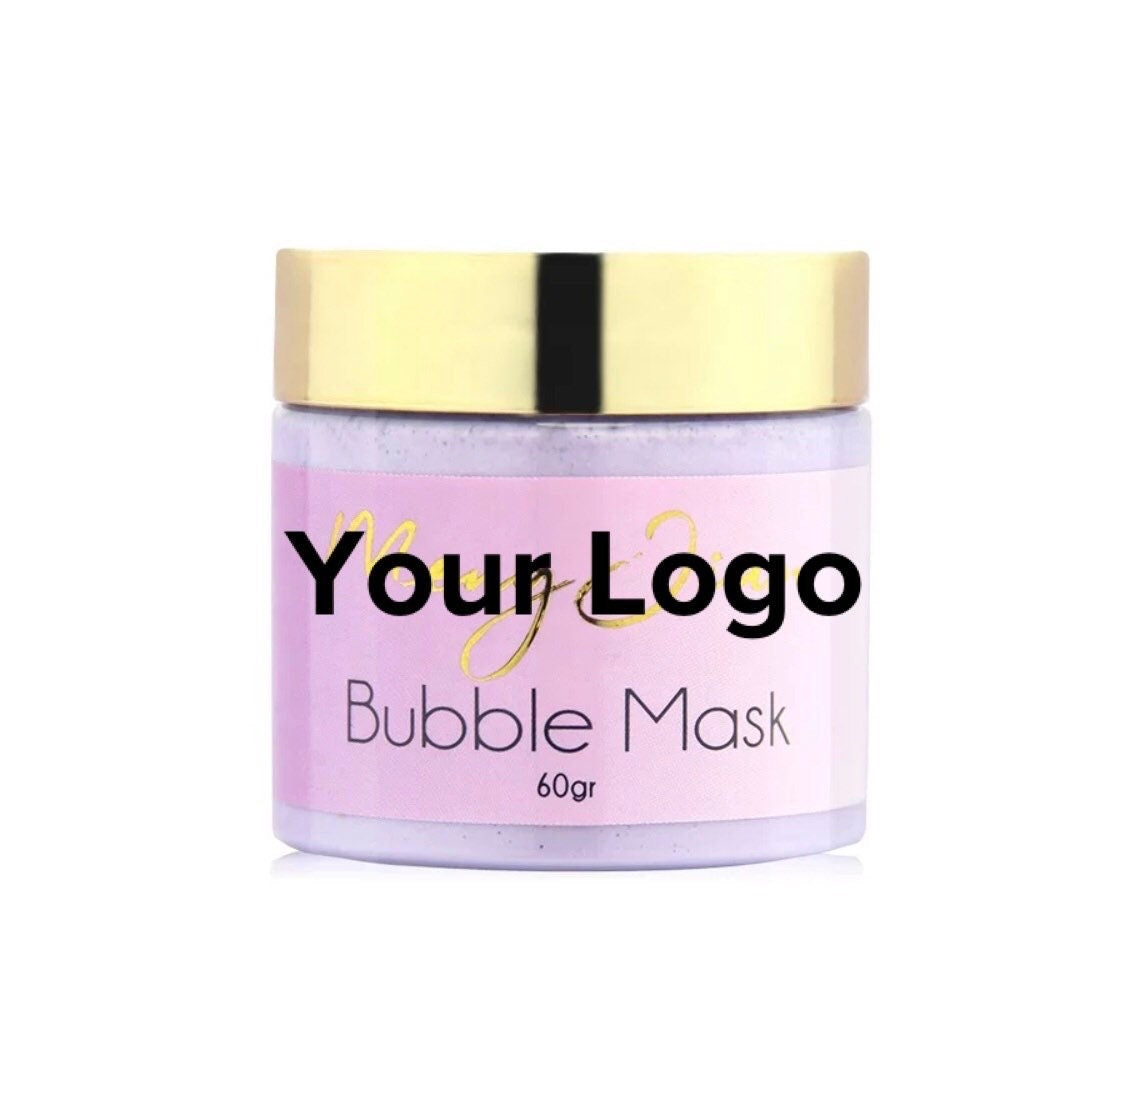 PRIVATE LABEL, Wholesale Luxury PREMIUM quality Pore Cleansing/ Tightening, Skin Brightening Volcanic Mud Bubble Mask